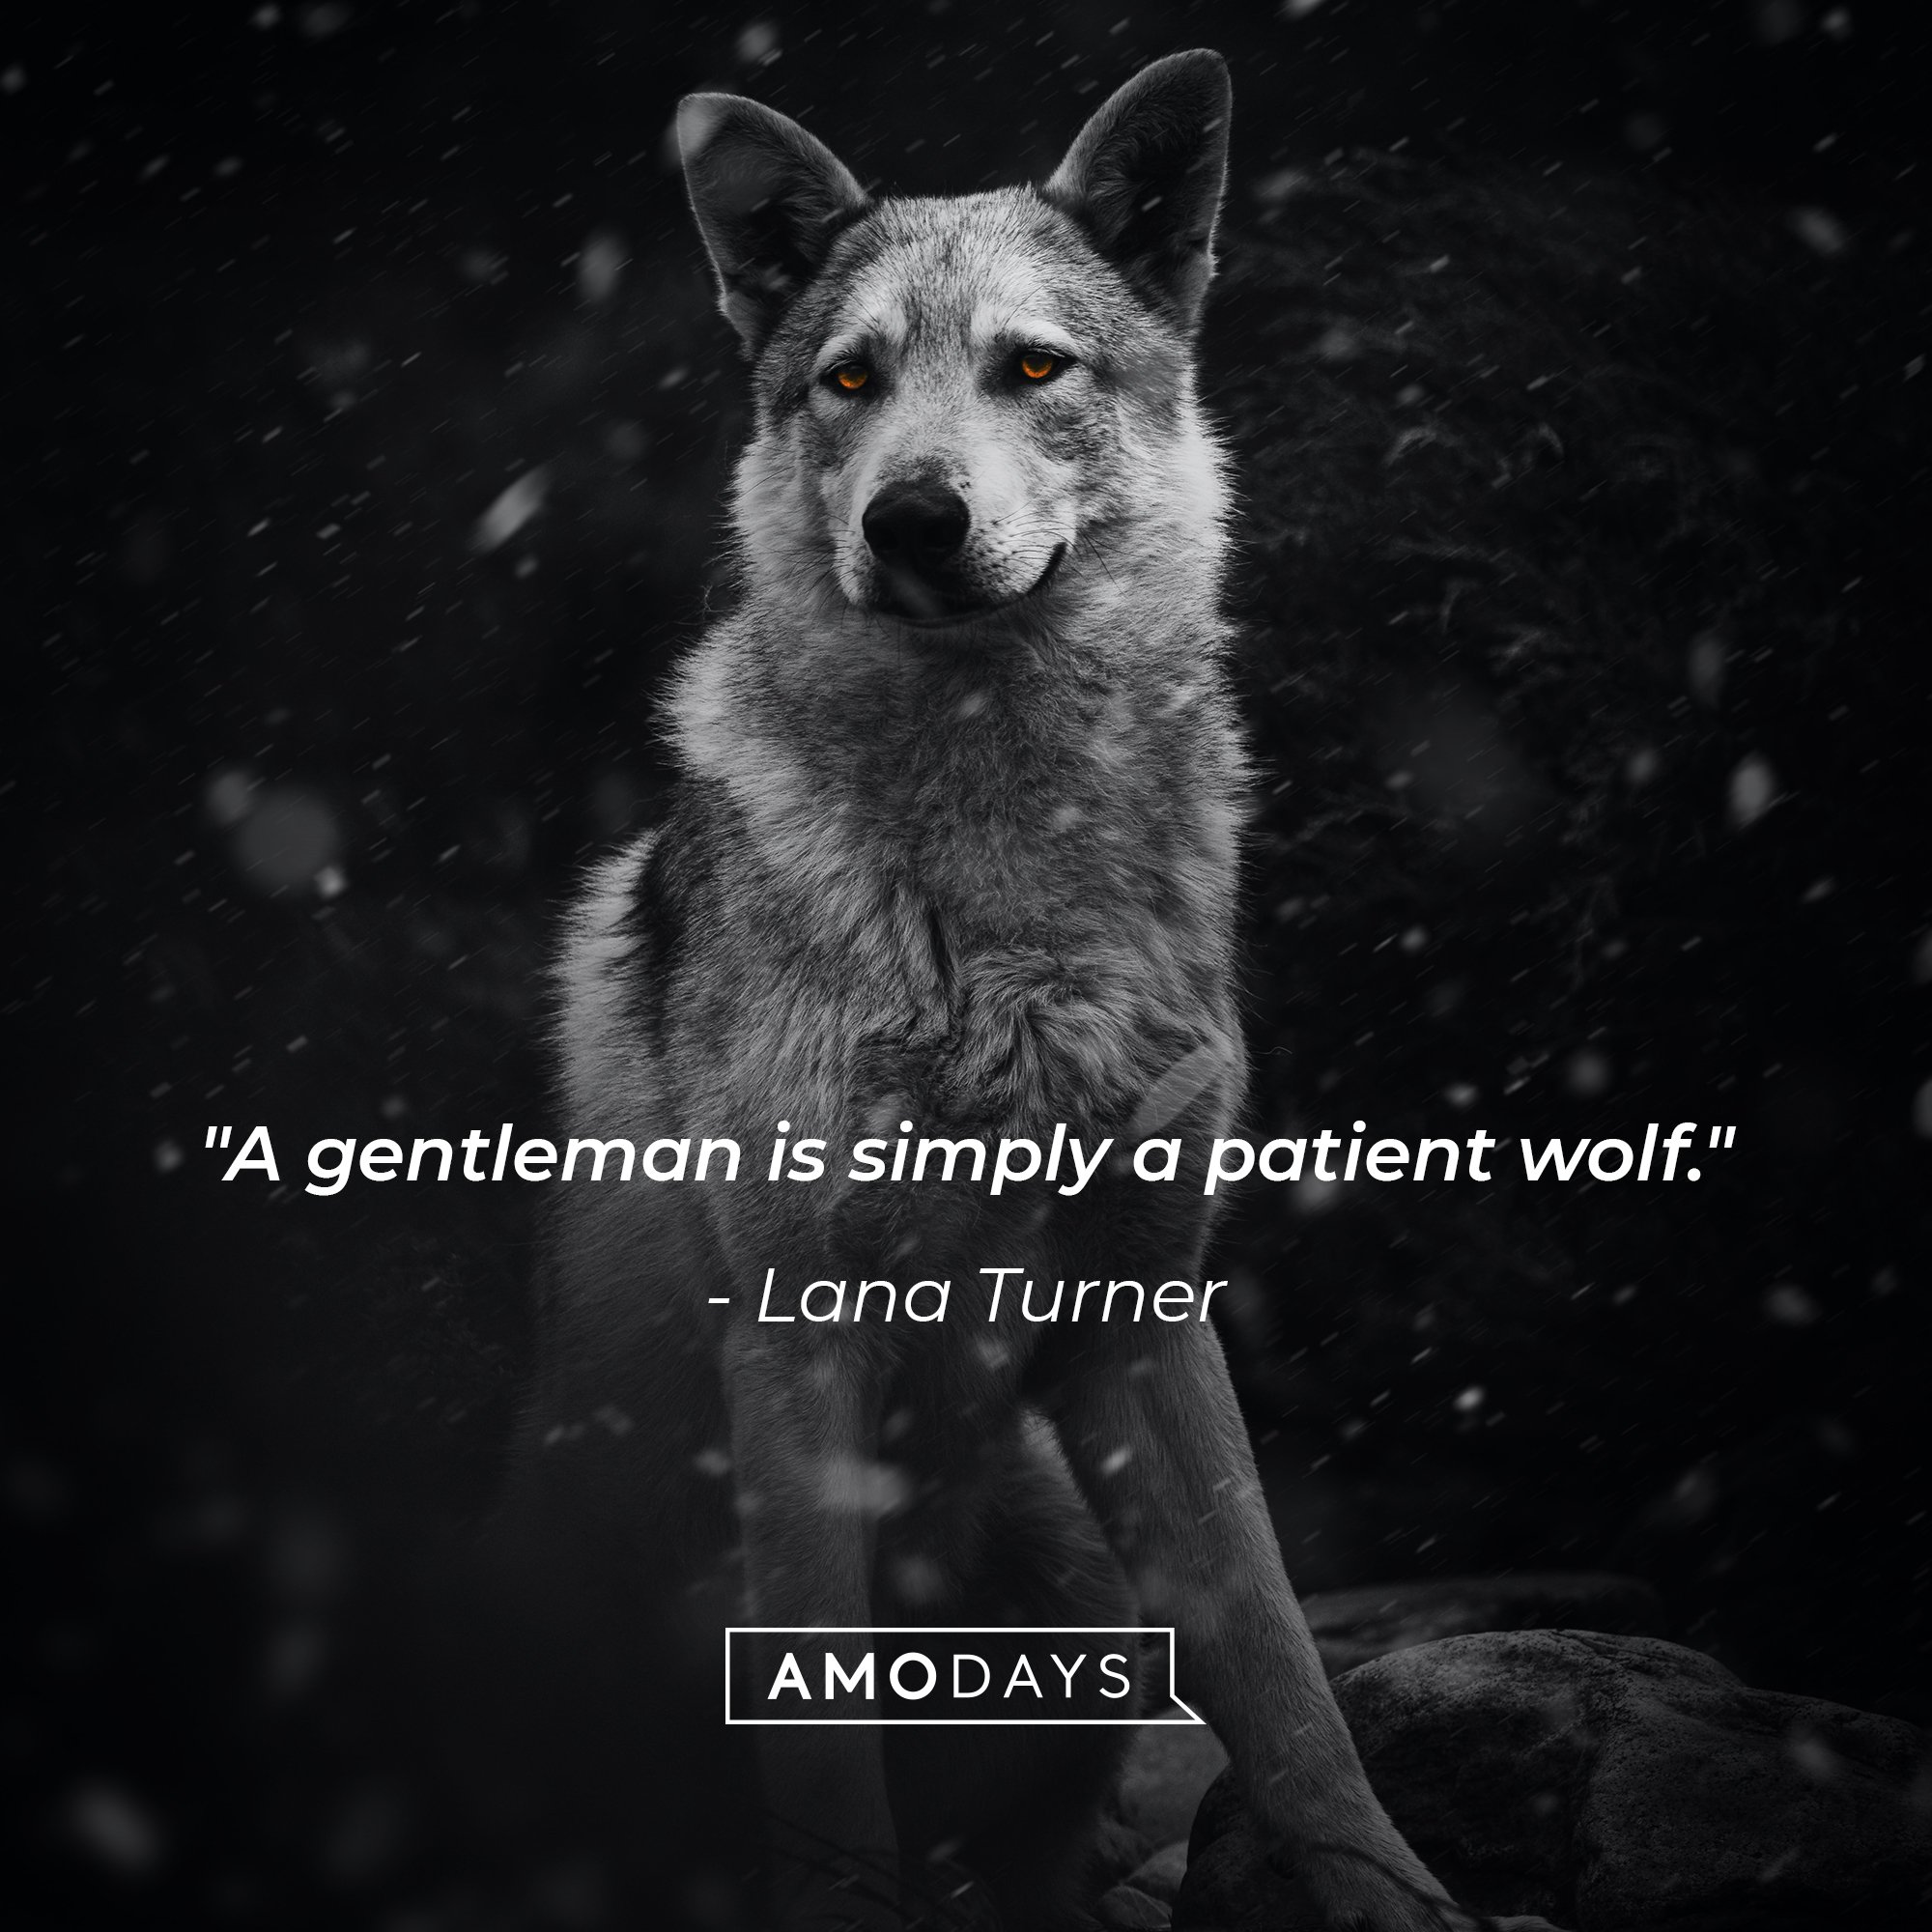 Lana Turner's quote: "A gentleman is simply a patient wolf." | Image: AmoDays